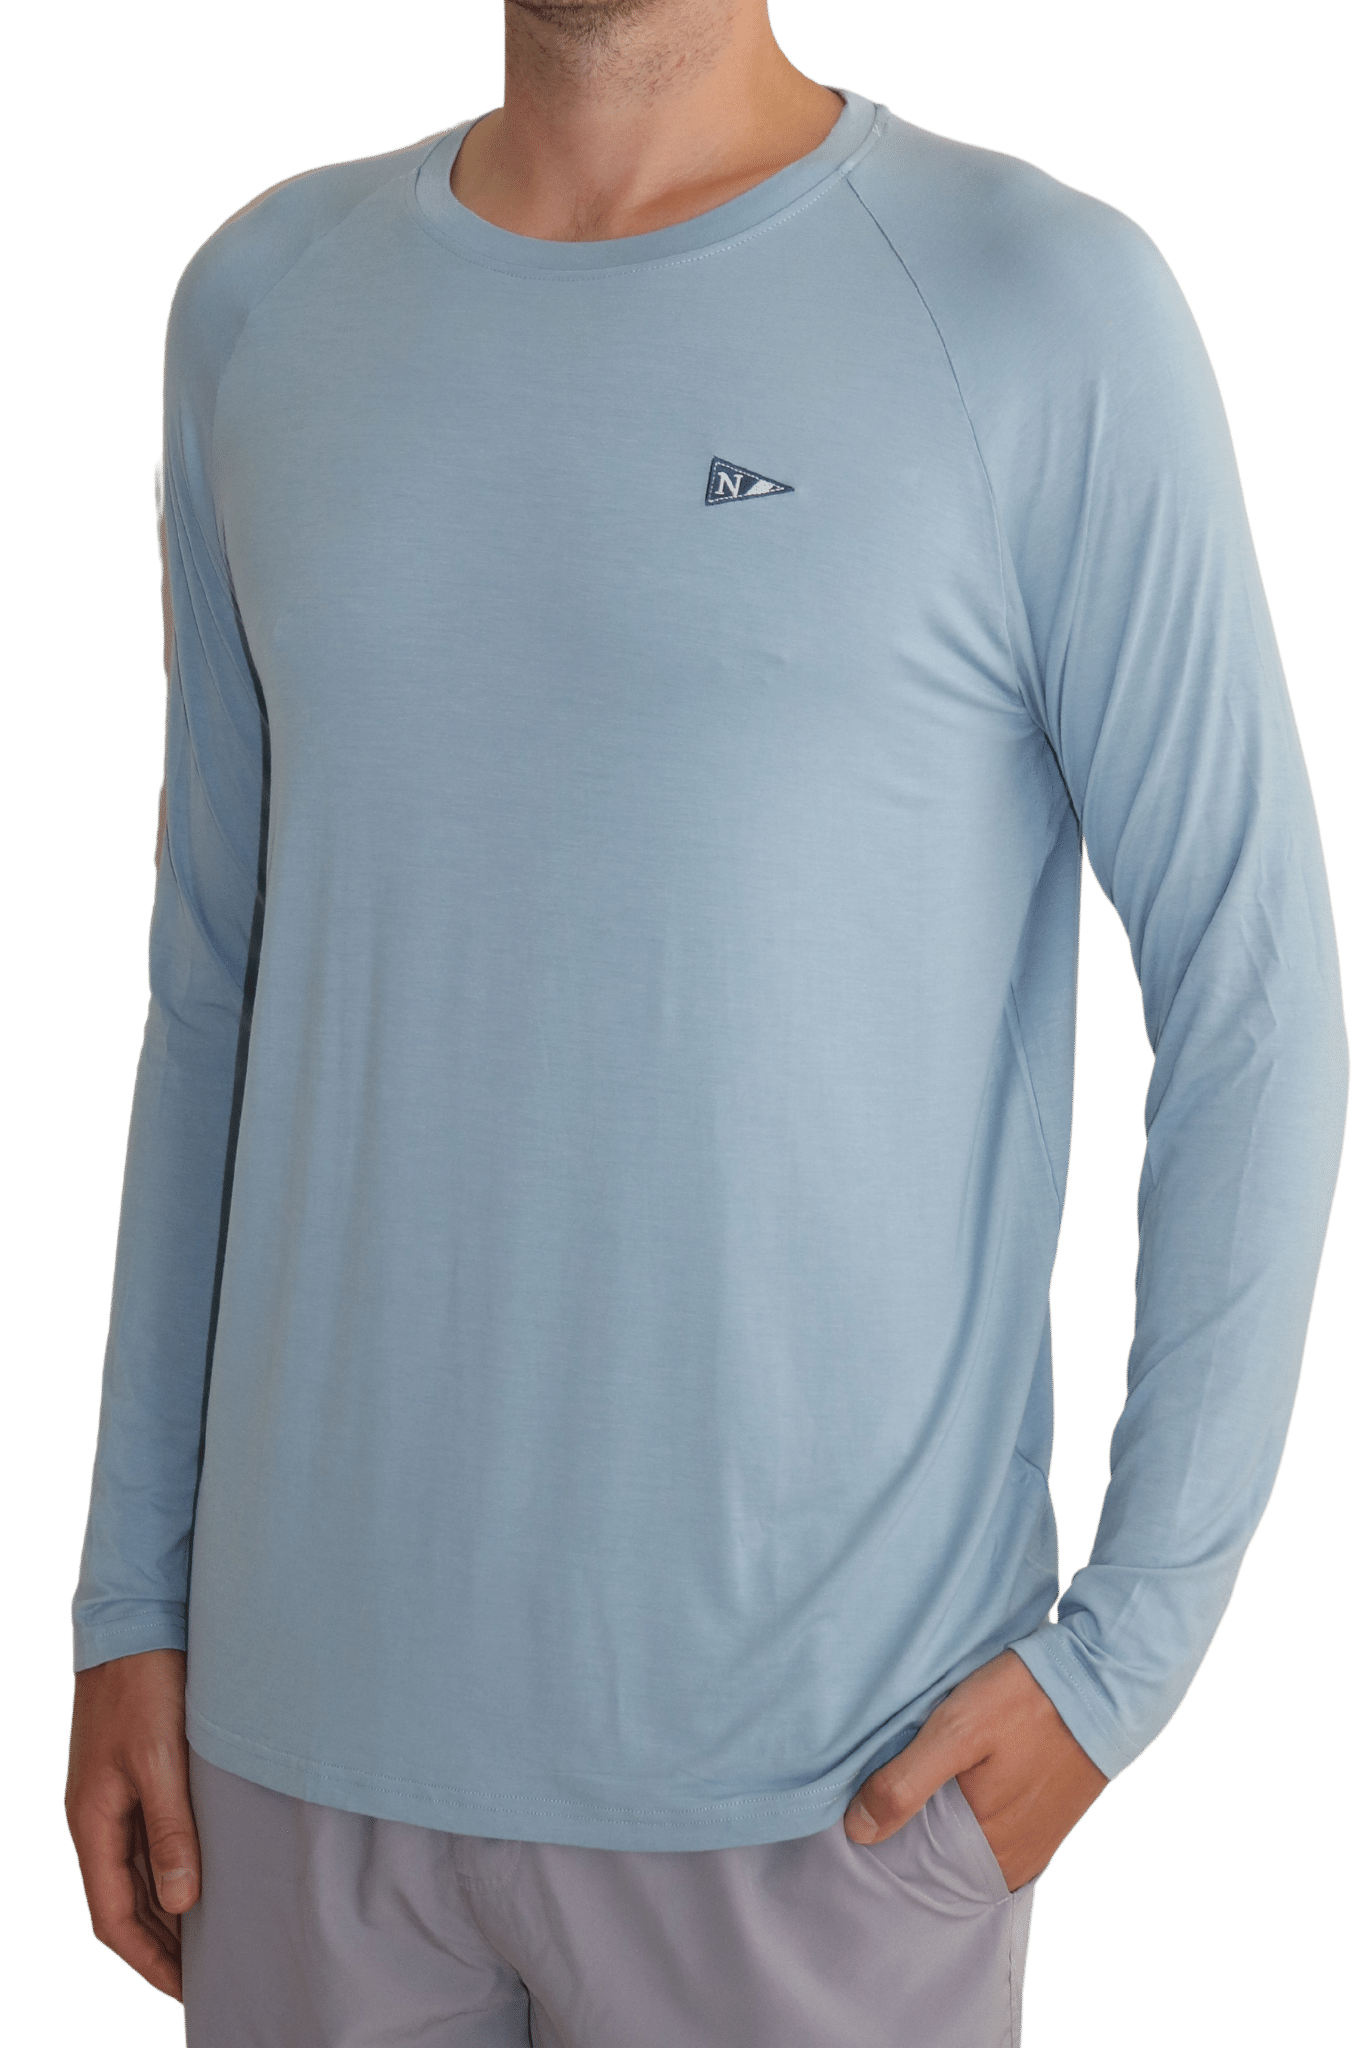 Front of the new light ocean blue icon long sleeve bamboo shirt with 35+ UPF sun protection.